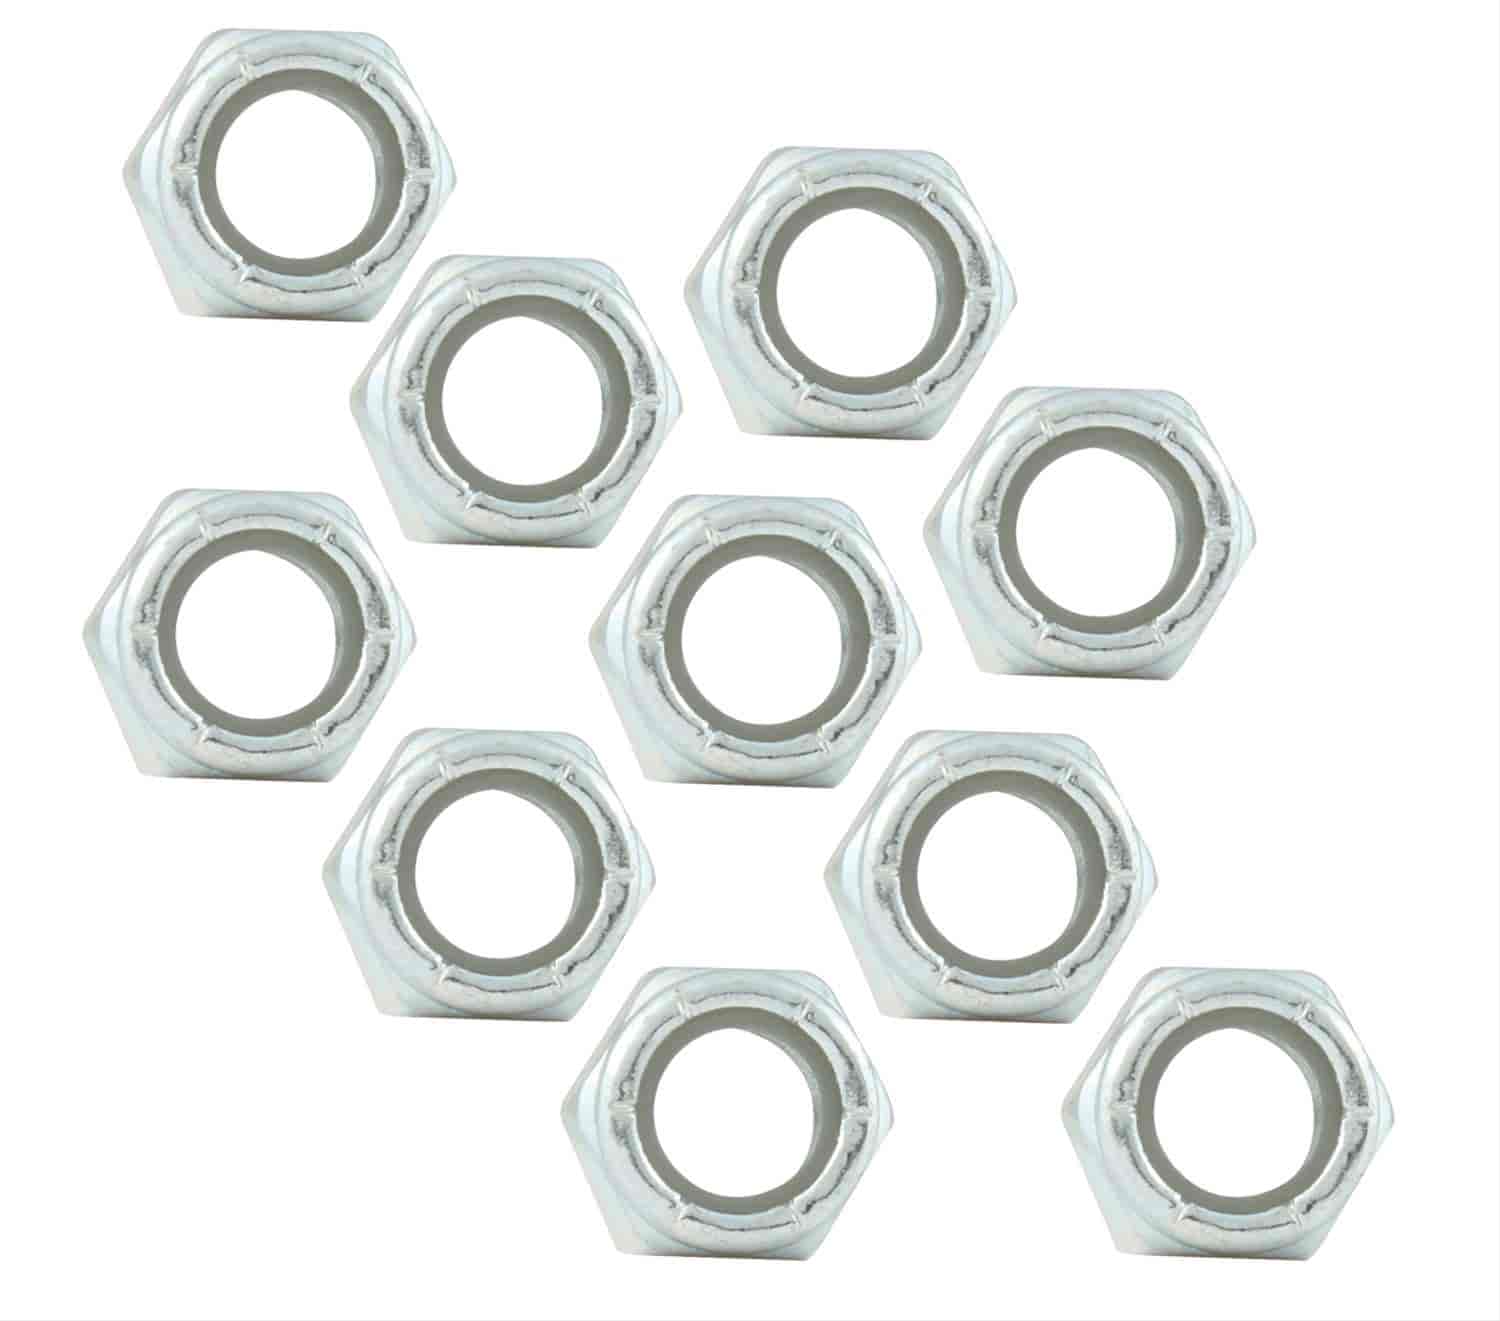 Fine Thread Hex Nuts With Nylon Inserts 3/8"-24